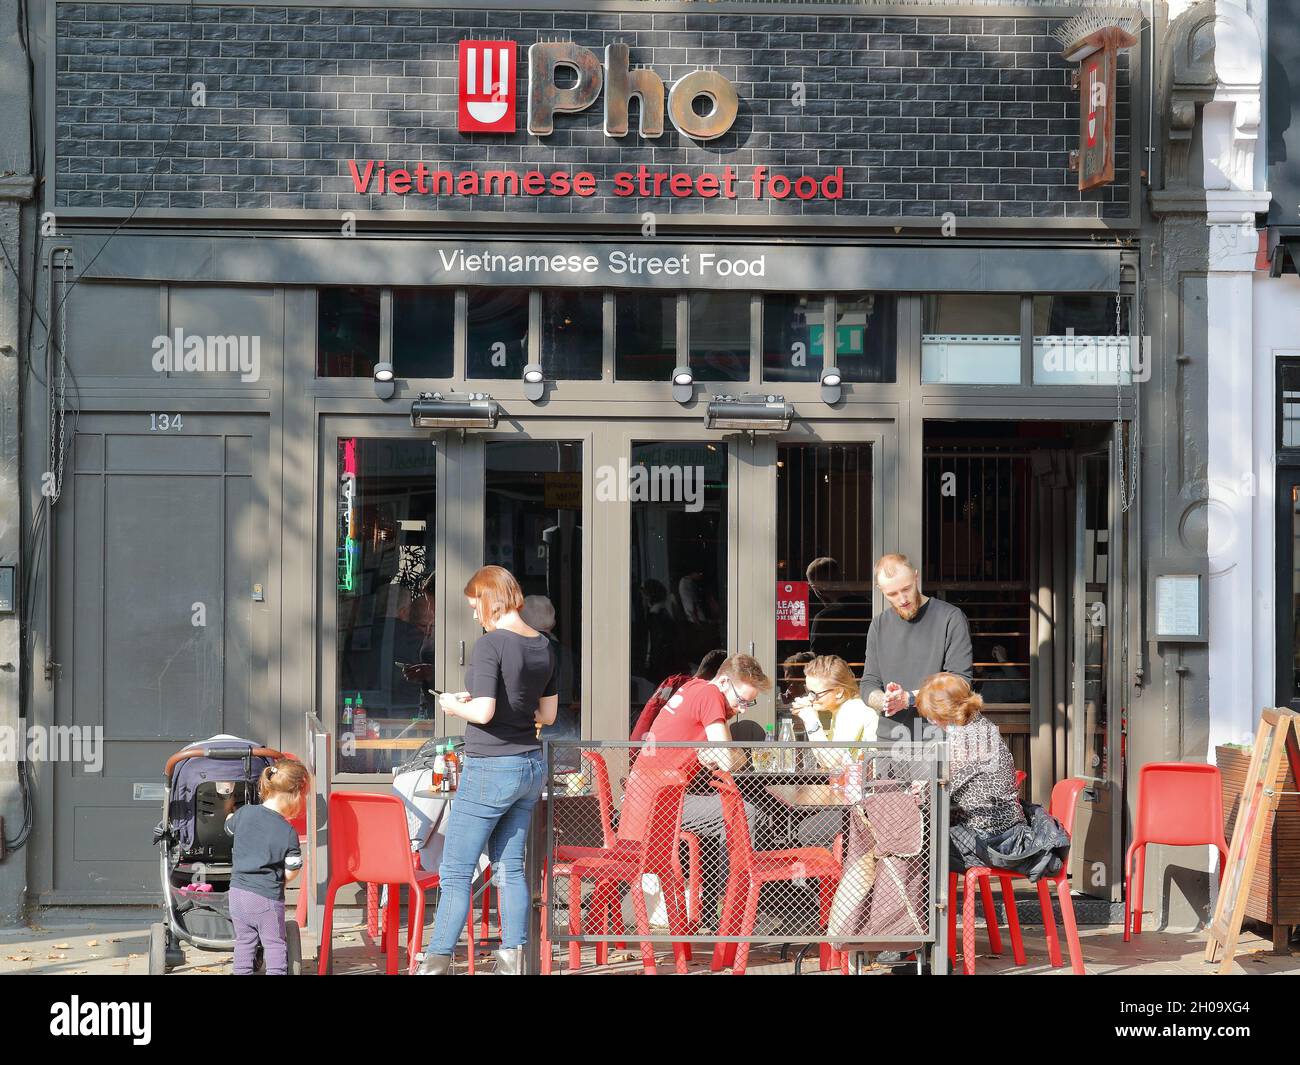 People sitting outside Pho restaurant which offers Vietnamese Street Food in Chiswick High Road, London, UK Stock Photo